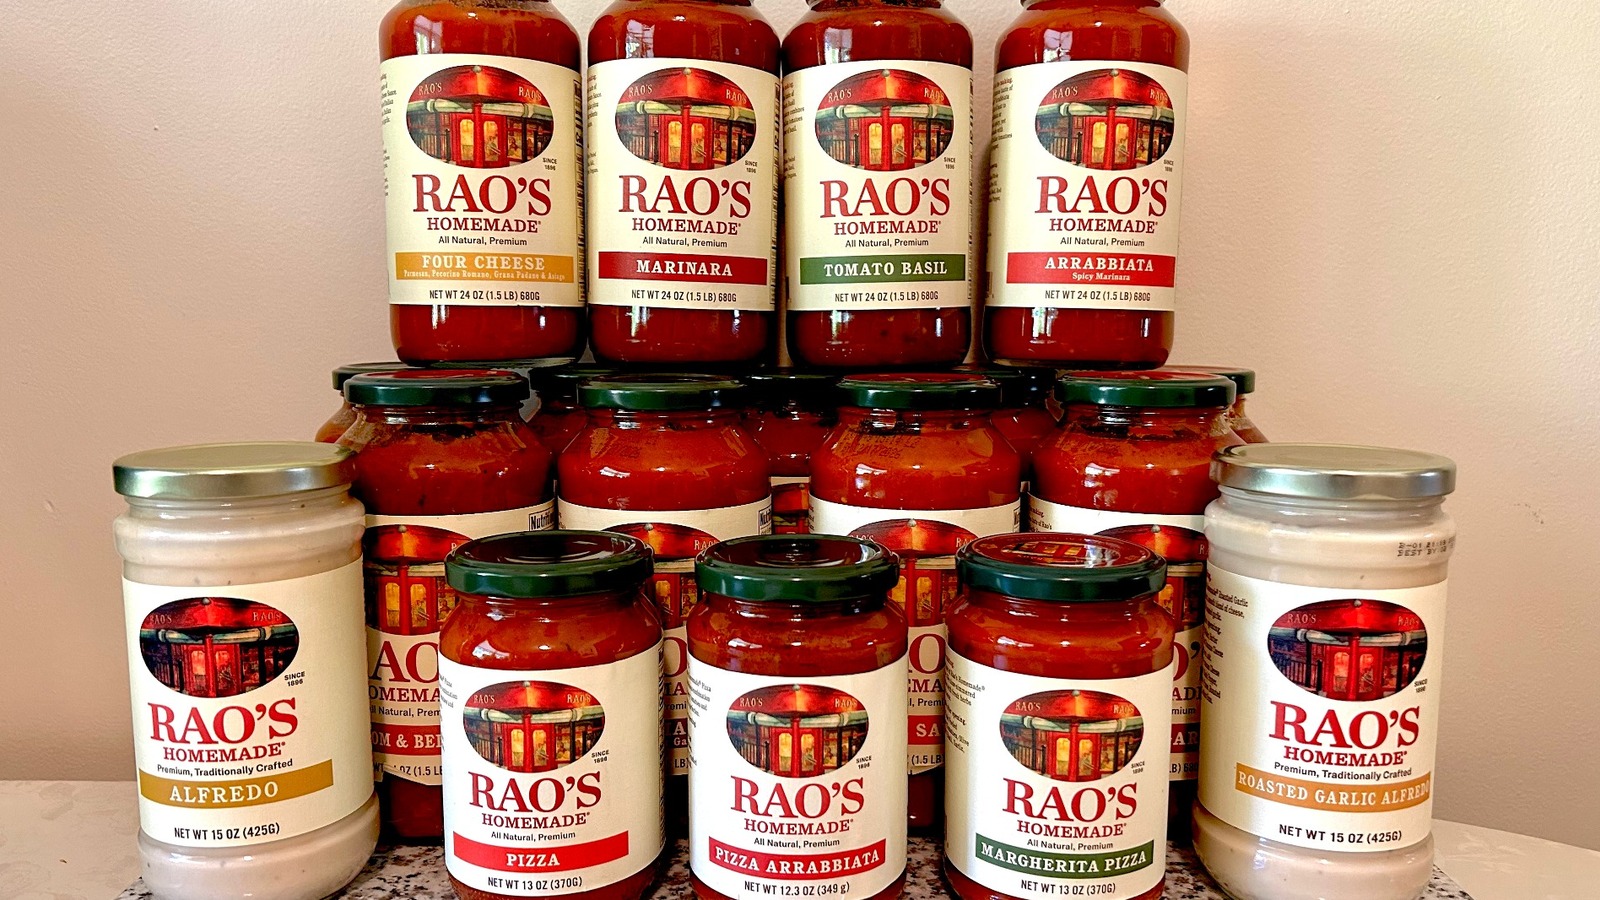 18 Rao's Homemade Sauce Flavors, Ranked - Daily Meal